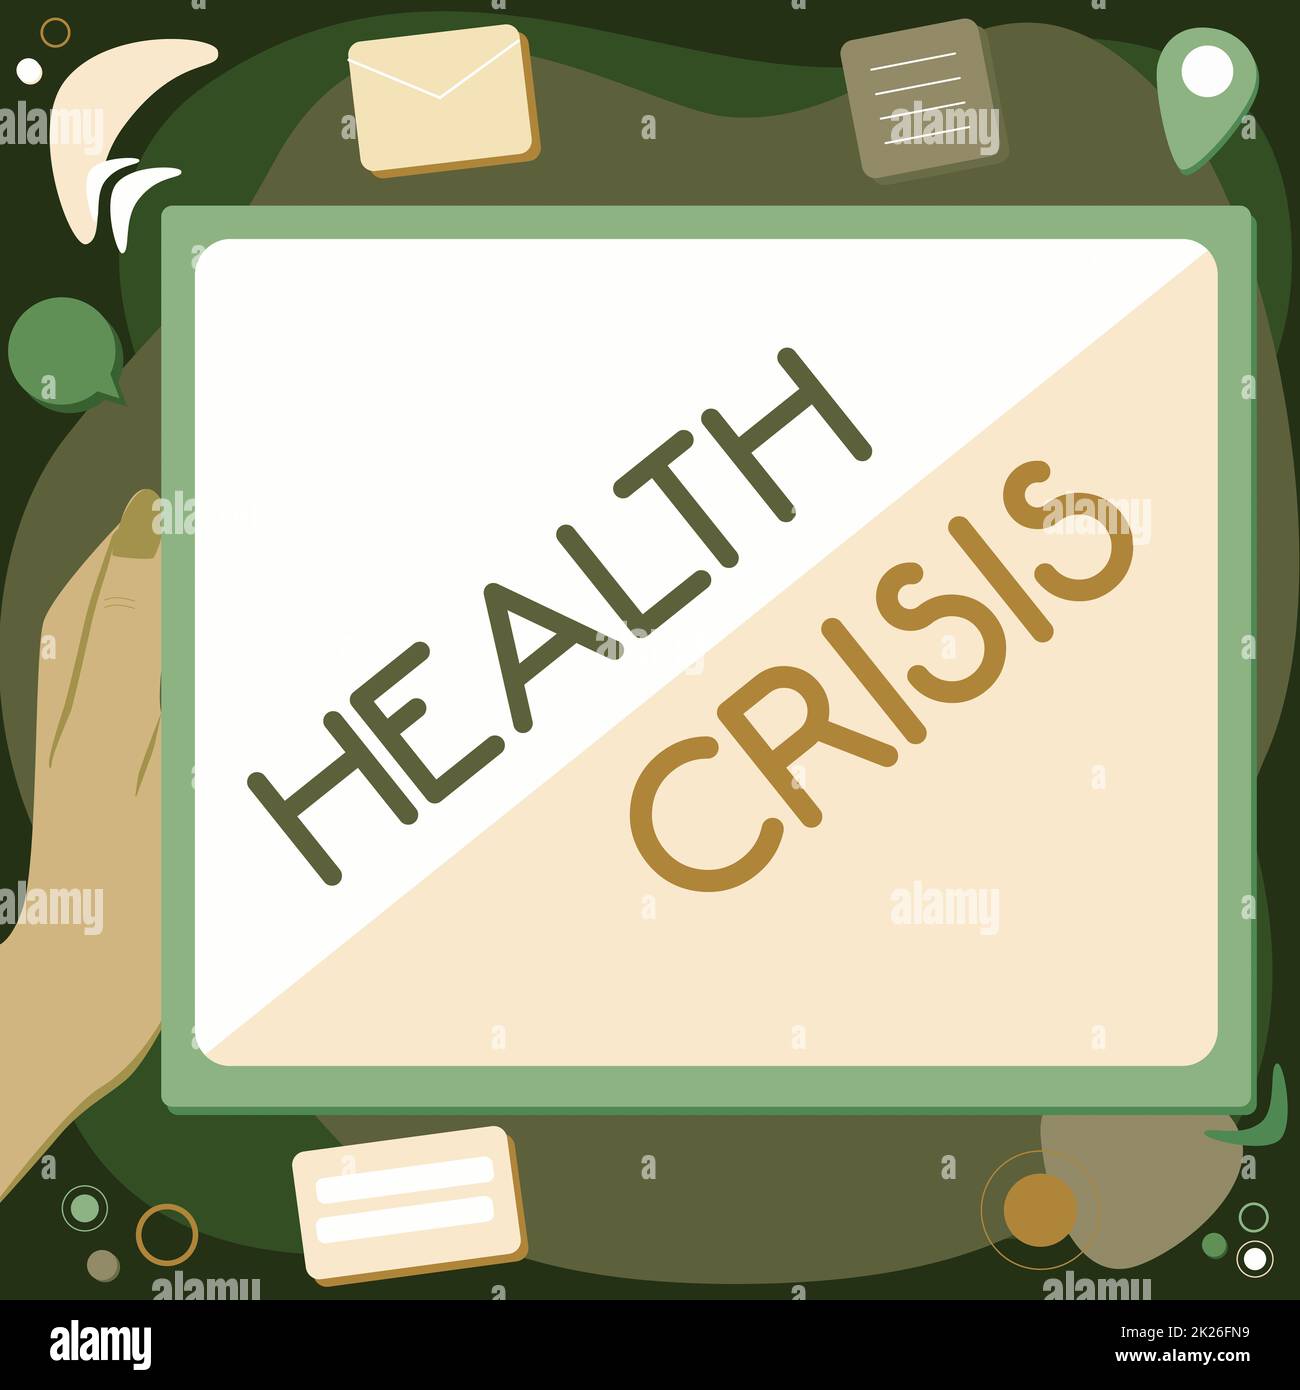 Text sign showing Health Crisis. Business concept fitness problem that affects human in more geographic areas Abstract Deleting Browser History, Editing Organizing Online Files. Stock Photo